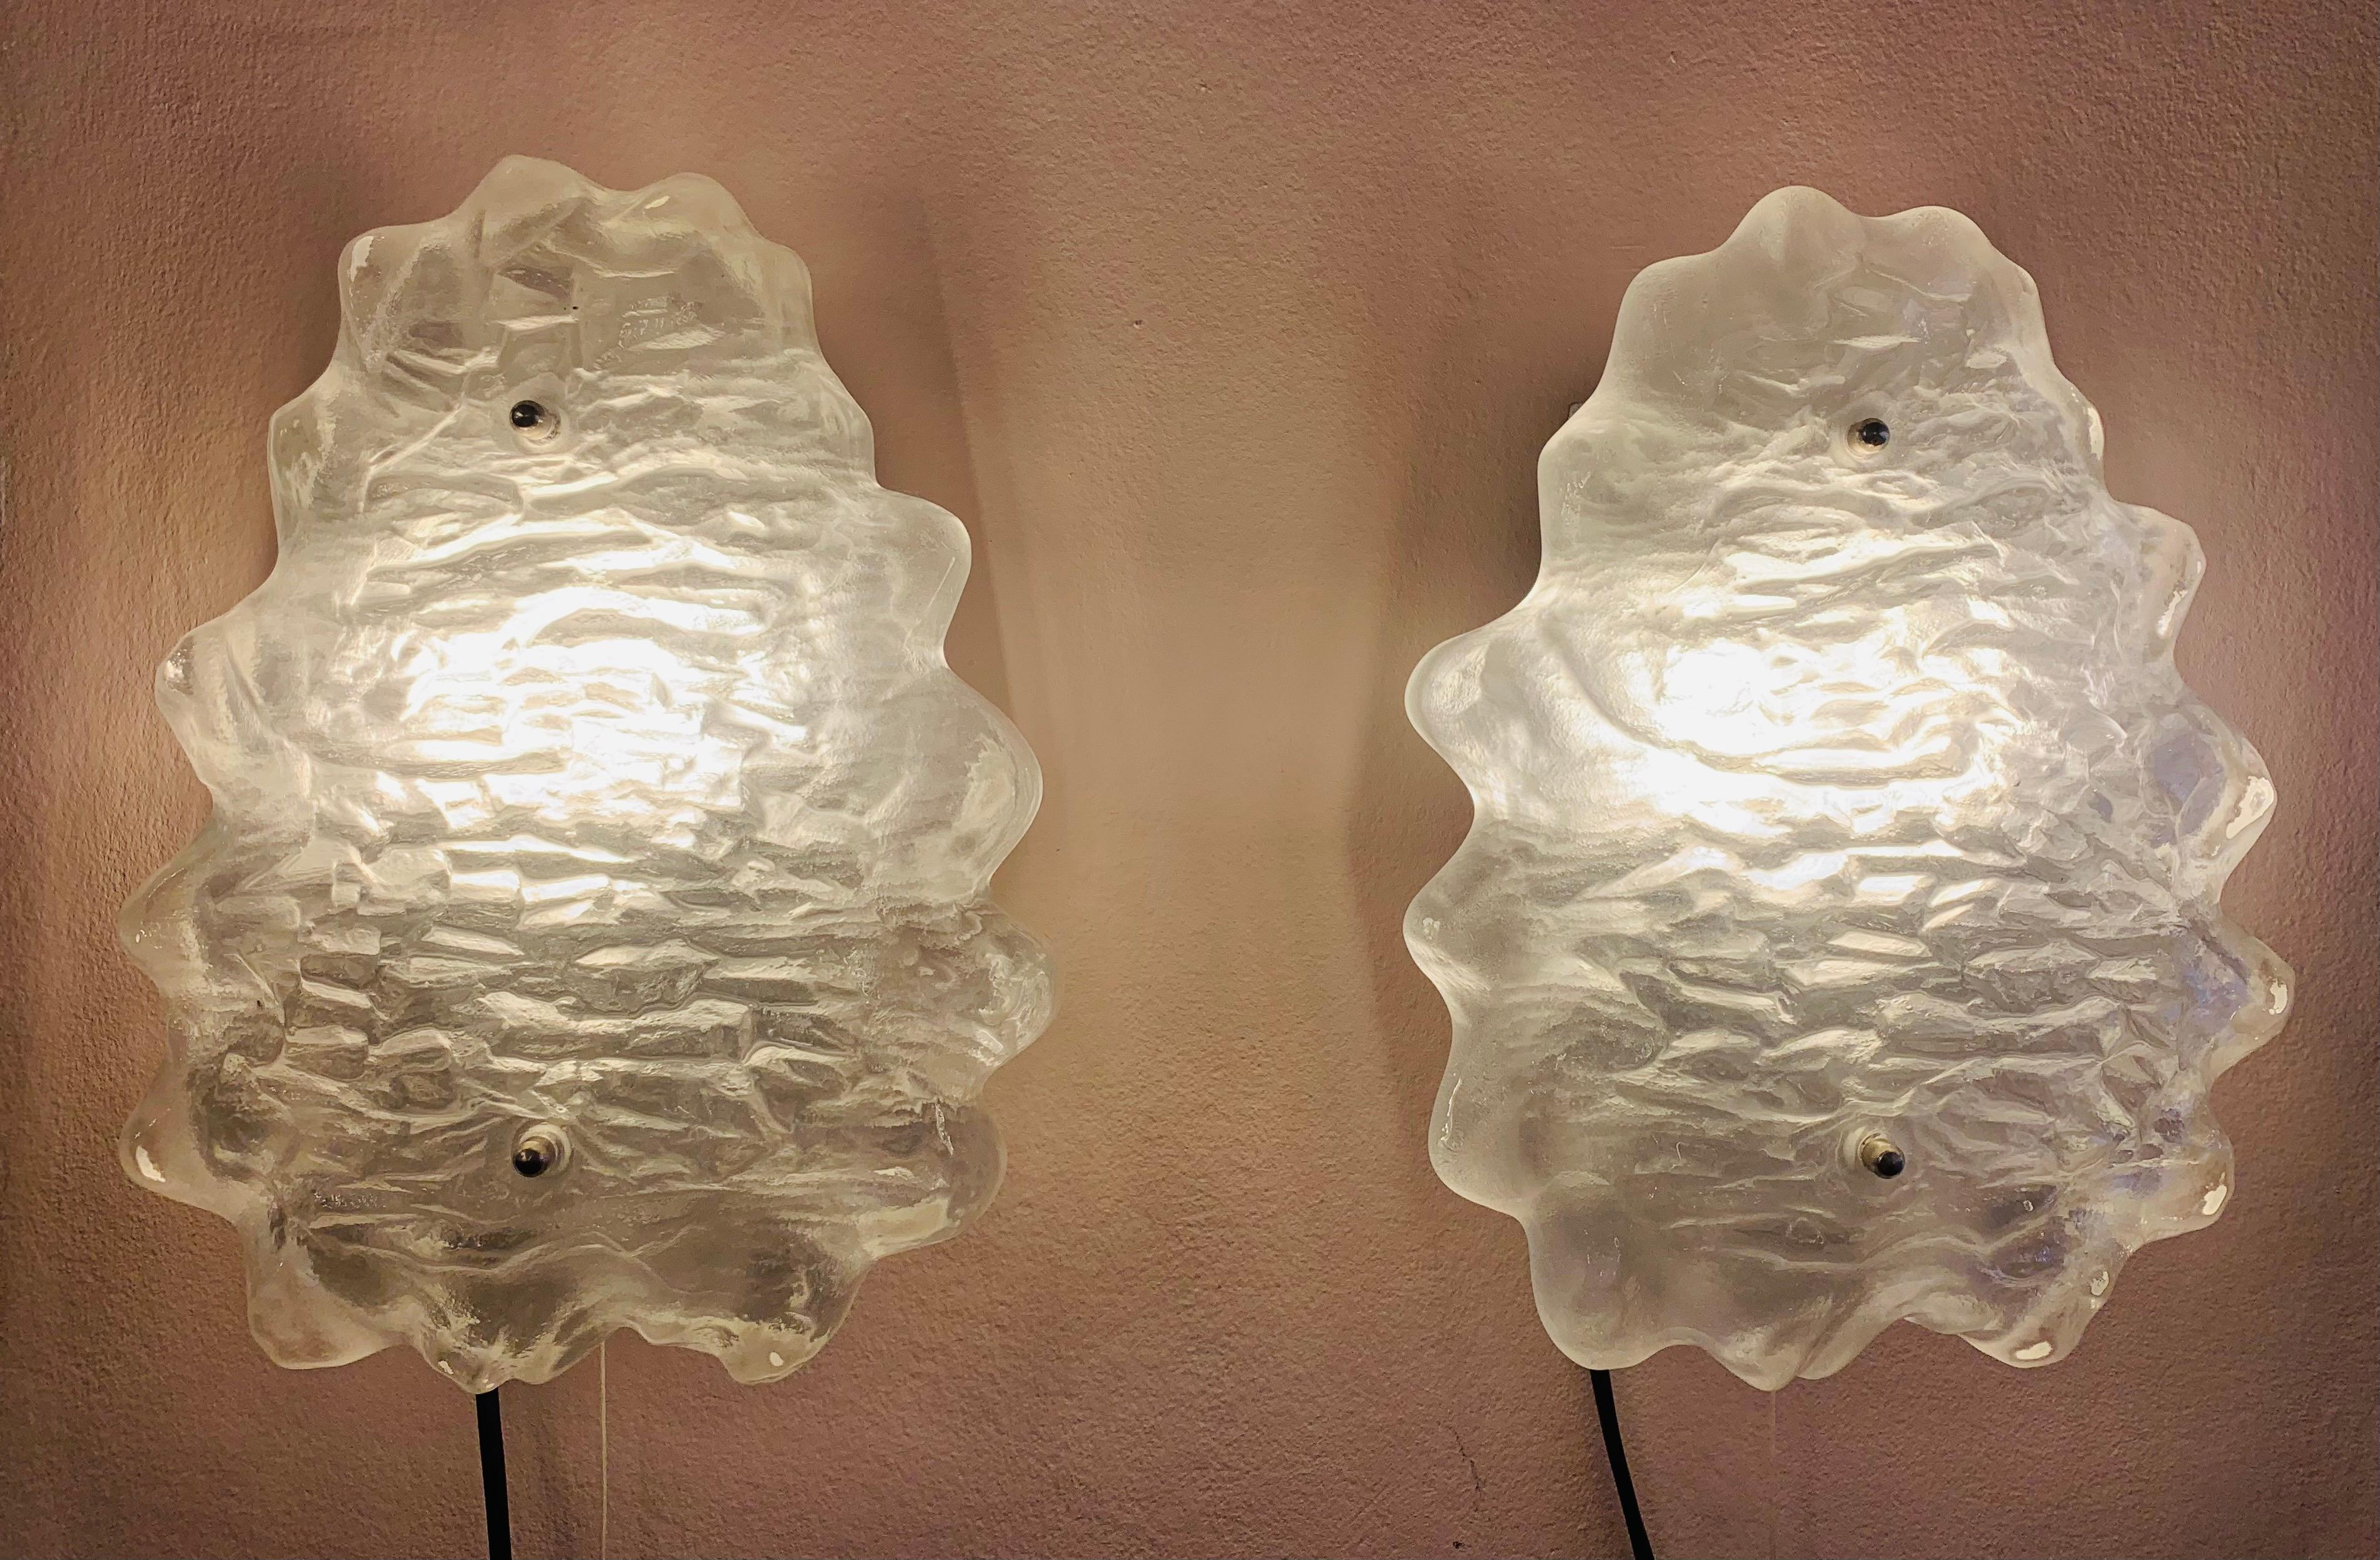 A beautiful pair of 1960s Murano iced or frosted glass wall lights or sconces manufactured by Kalmar Lighting, Austria. Designed by J.T Kalmar. The textured, ripple-effect, frosted, scalloped edged glass shades are held onto the satin nickel